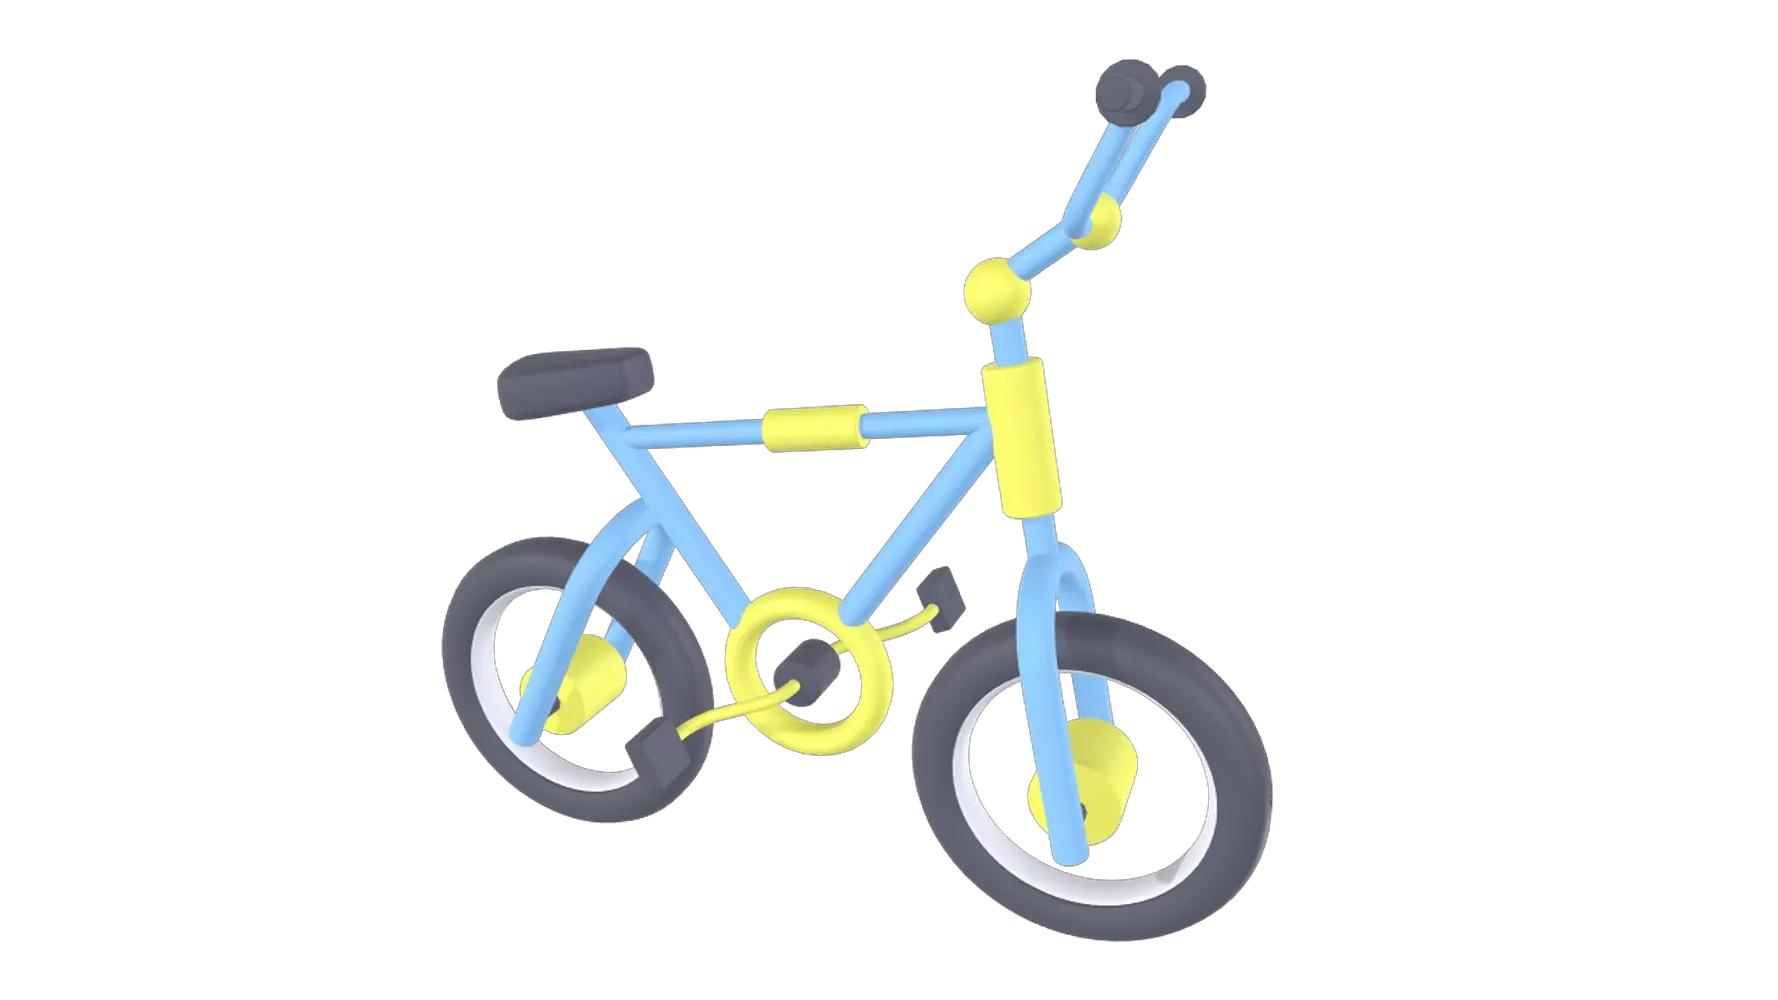 Bicycle 3d model--bed8e561-7cba-4d50-ad8c-a27facdfe80b